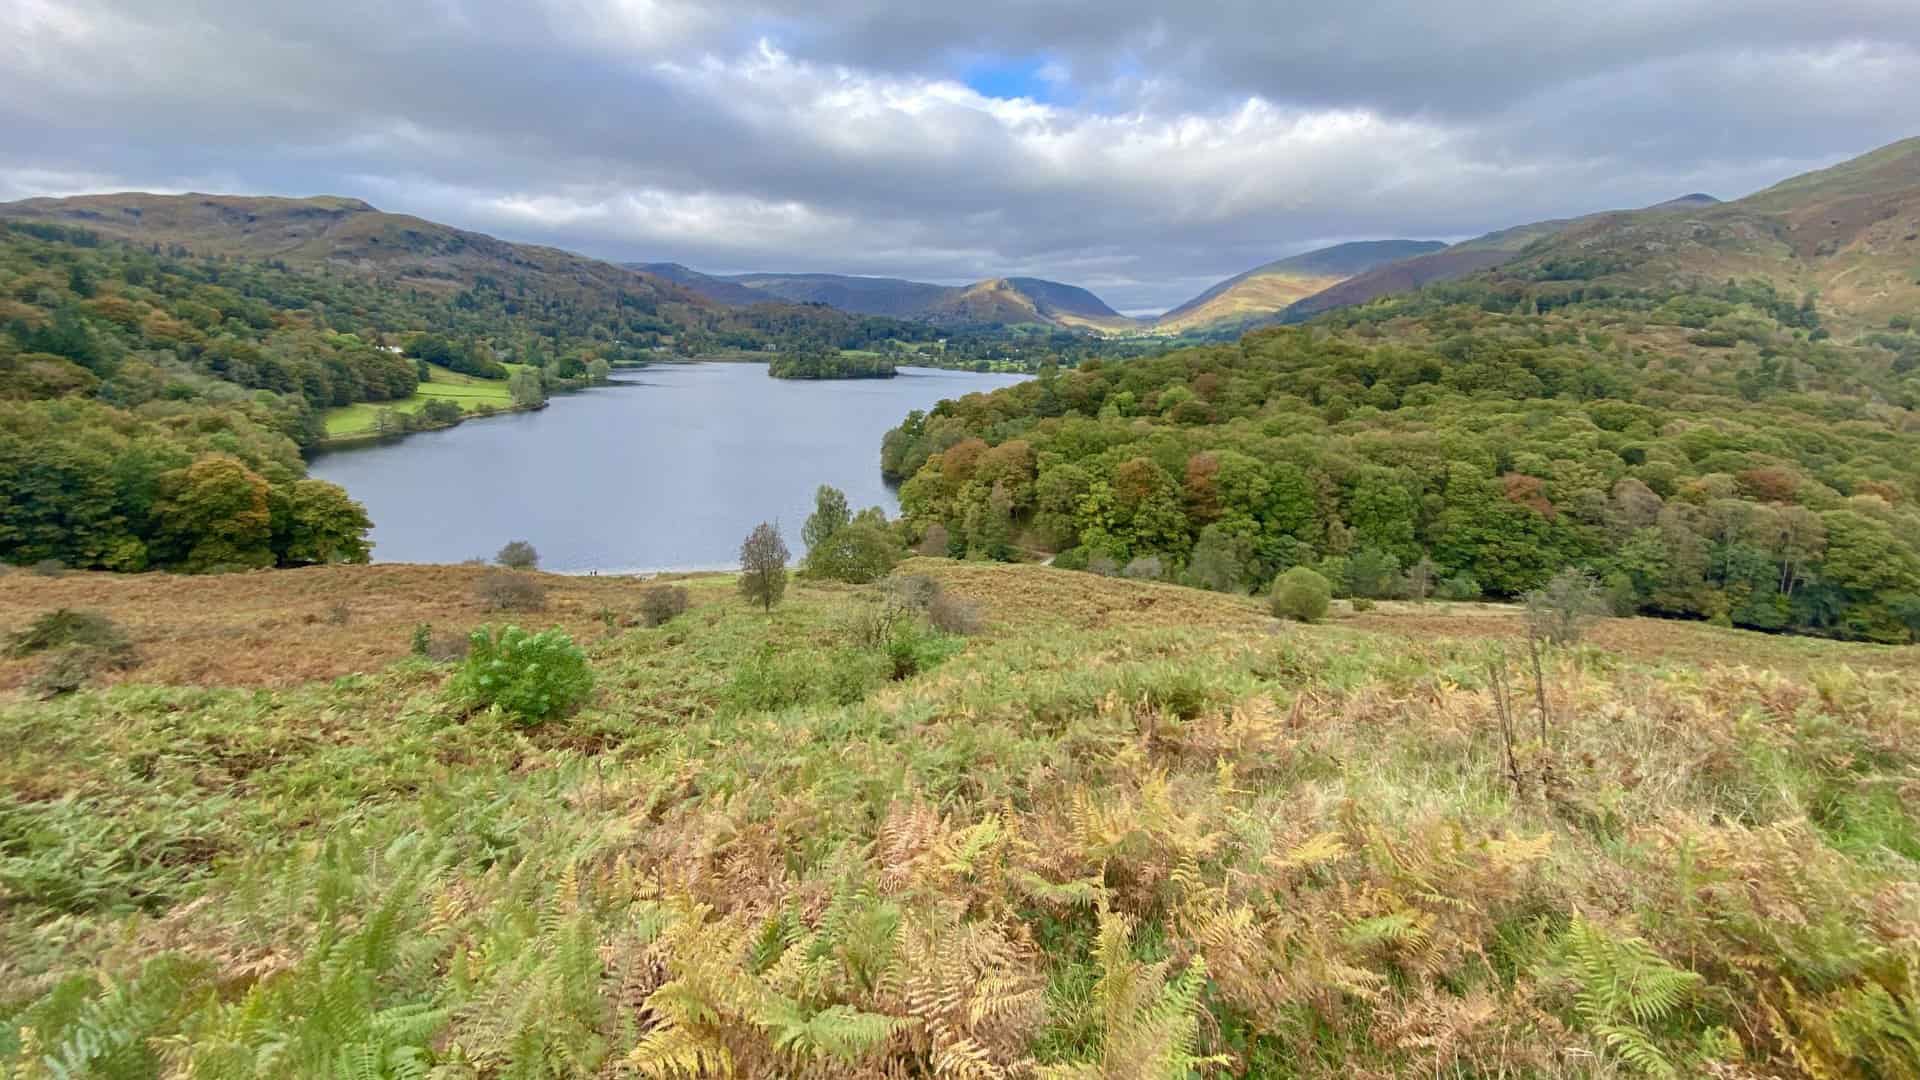 Stunning views of Grasmere and the surrounding mountains as we walk along Loughrigg Terrace. One of the many highlights of the Loughrigg Fell walk.